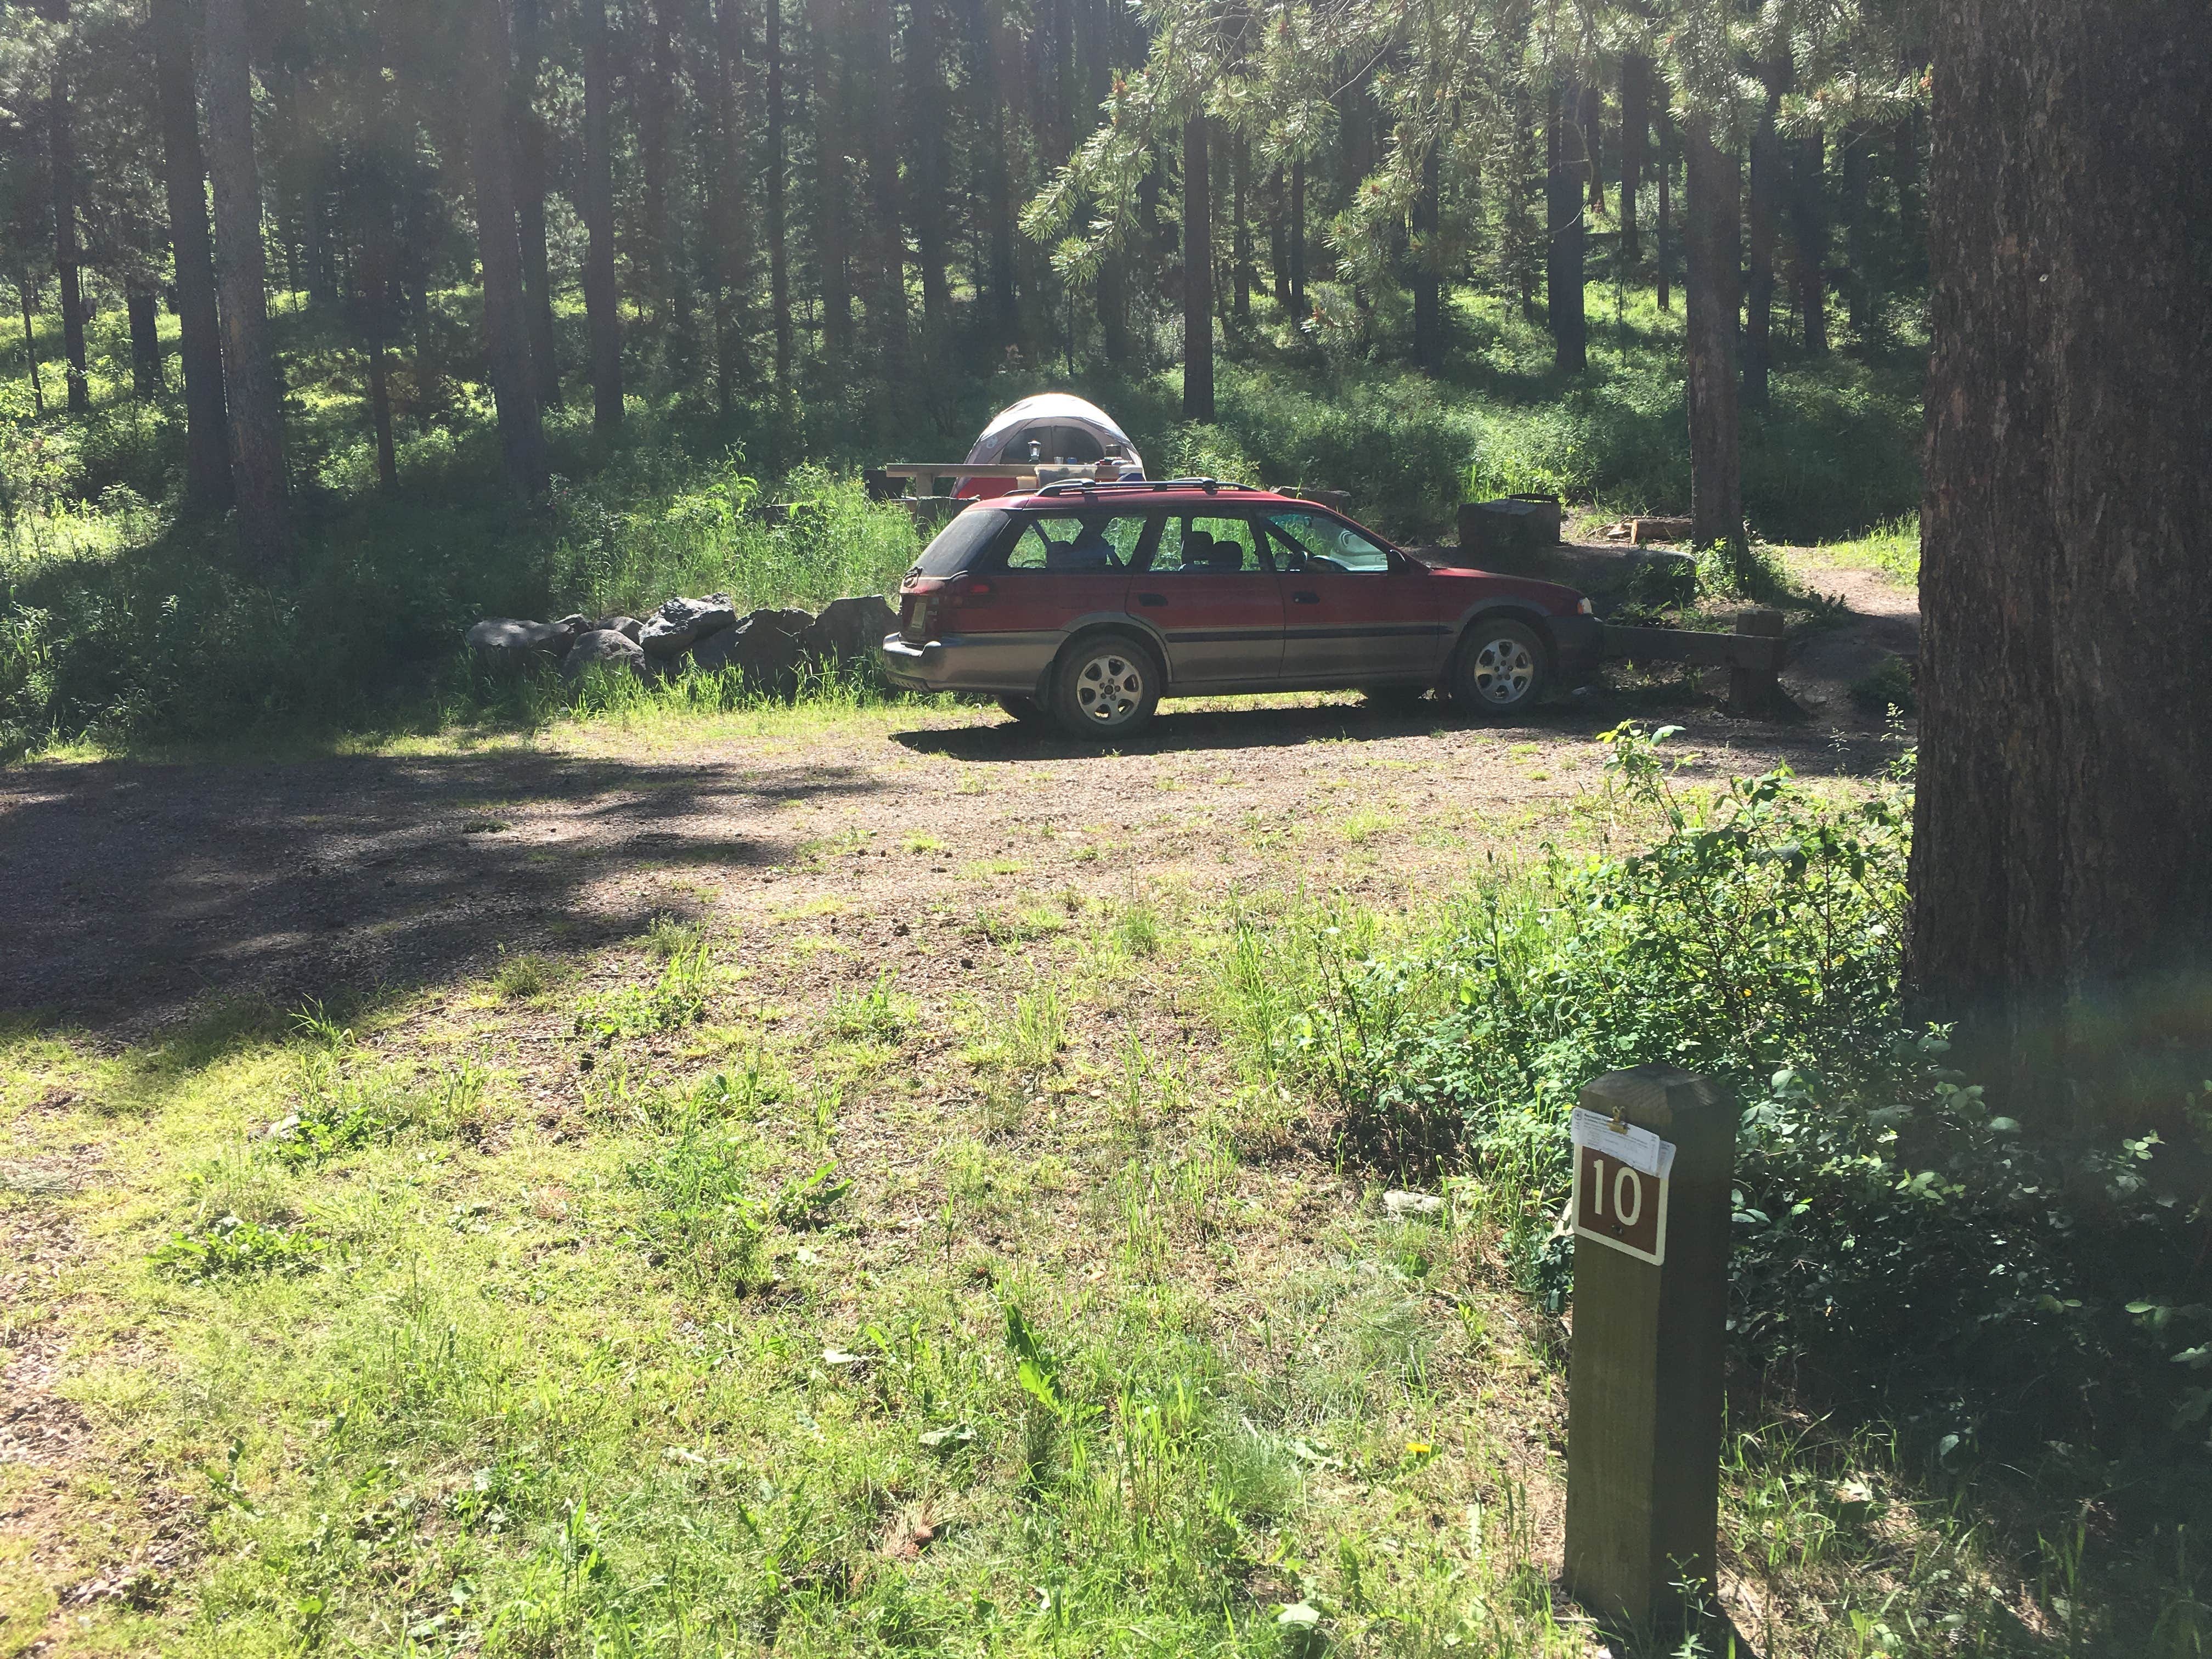 Camper submitted image from Thain Creek - 3